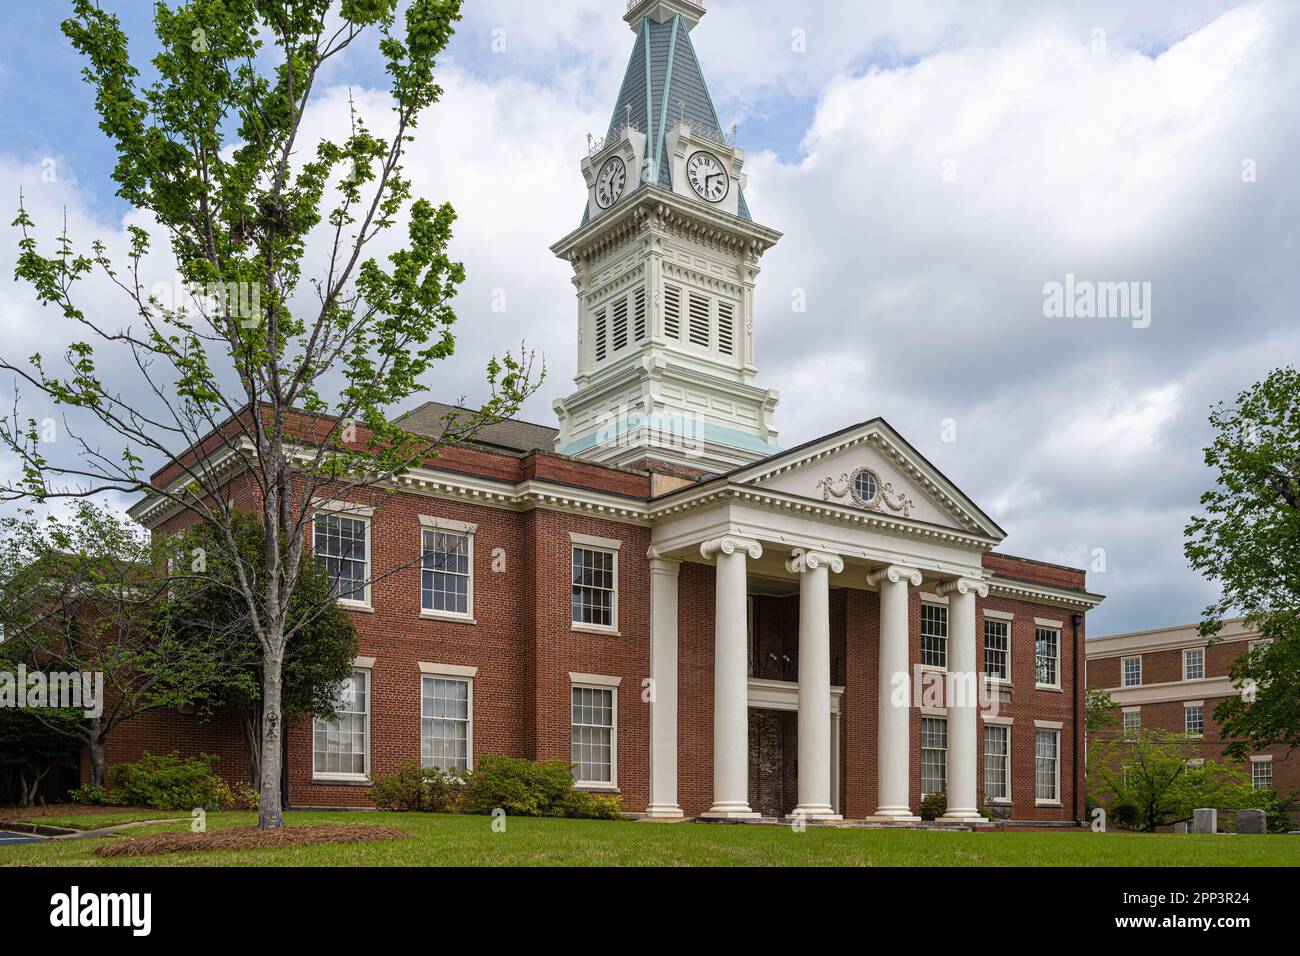 The Old Baldwin County Courthouse, currently part of the Georgia College & State University campus, in Milledgeville, Georgia. (USA) Stock Photo